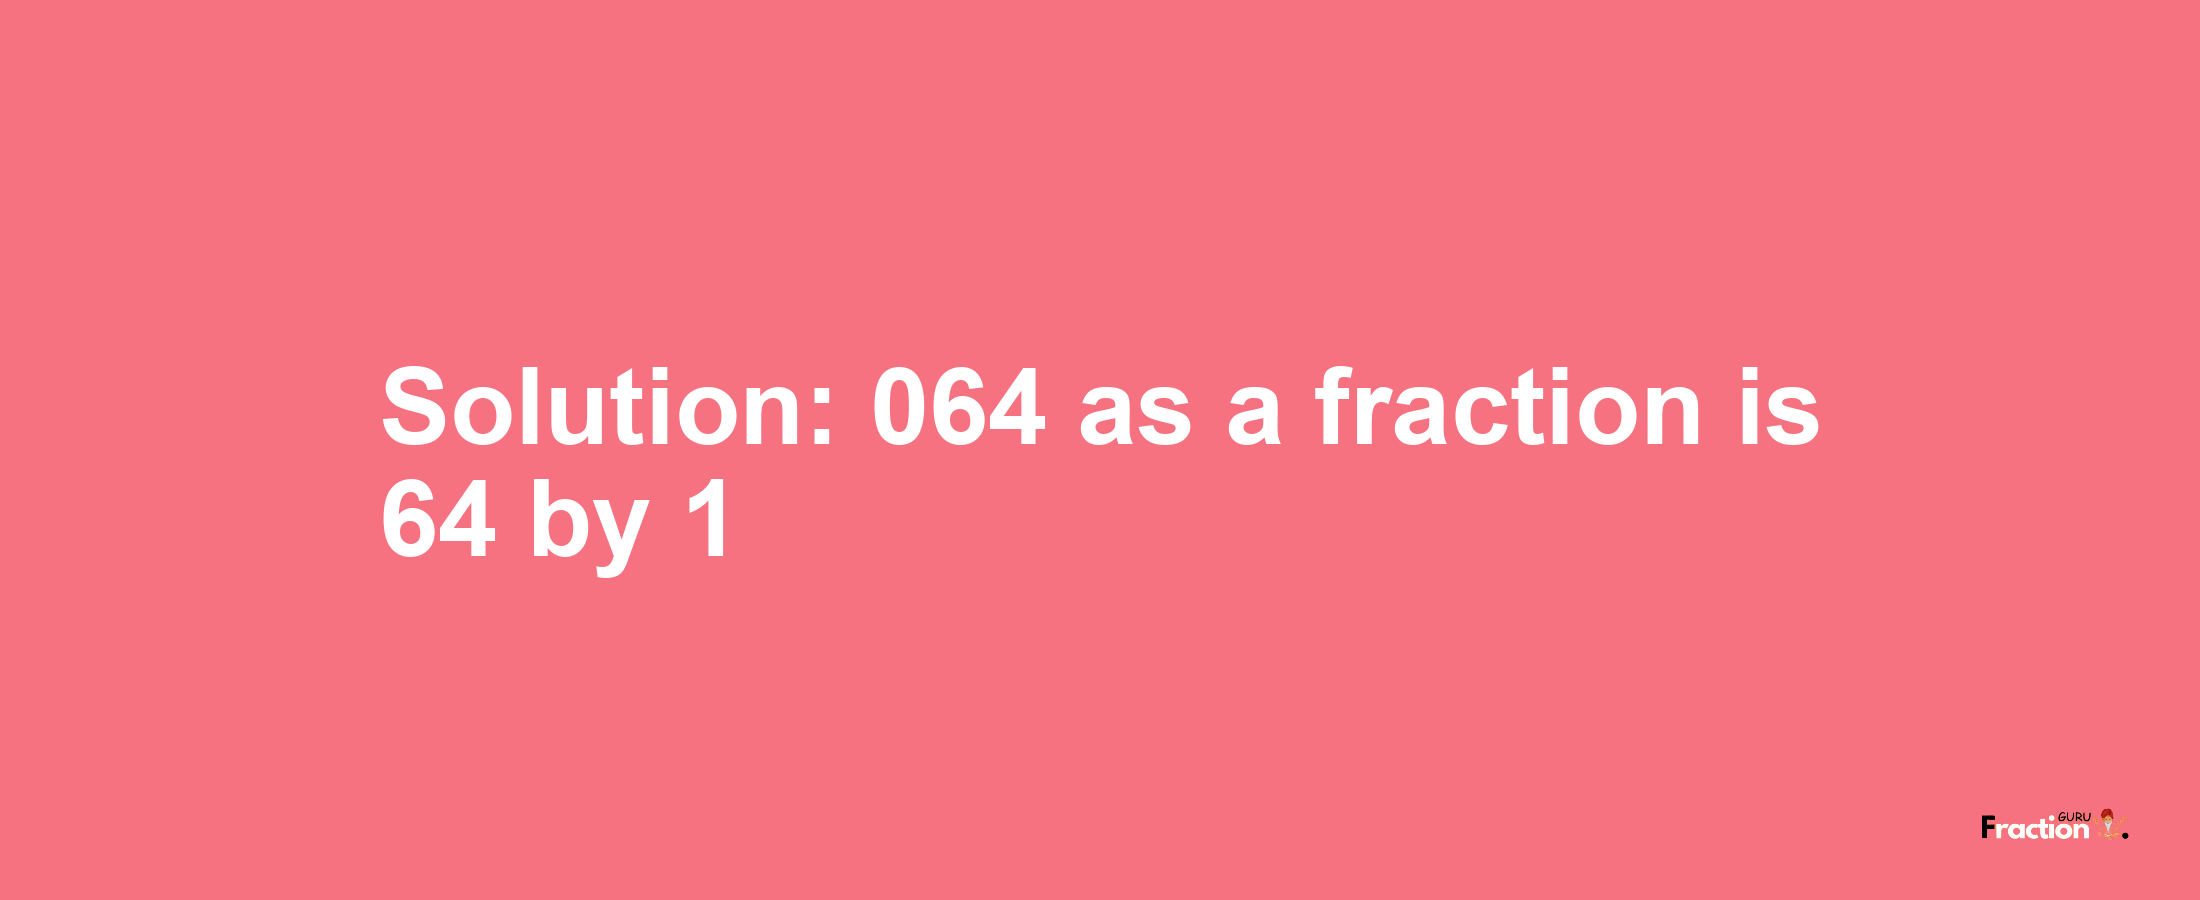 Solution:064 as a fraction is 64/1